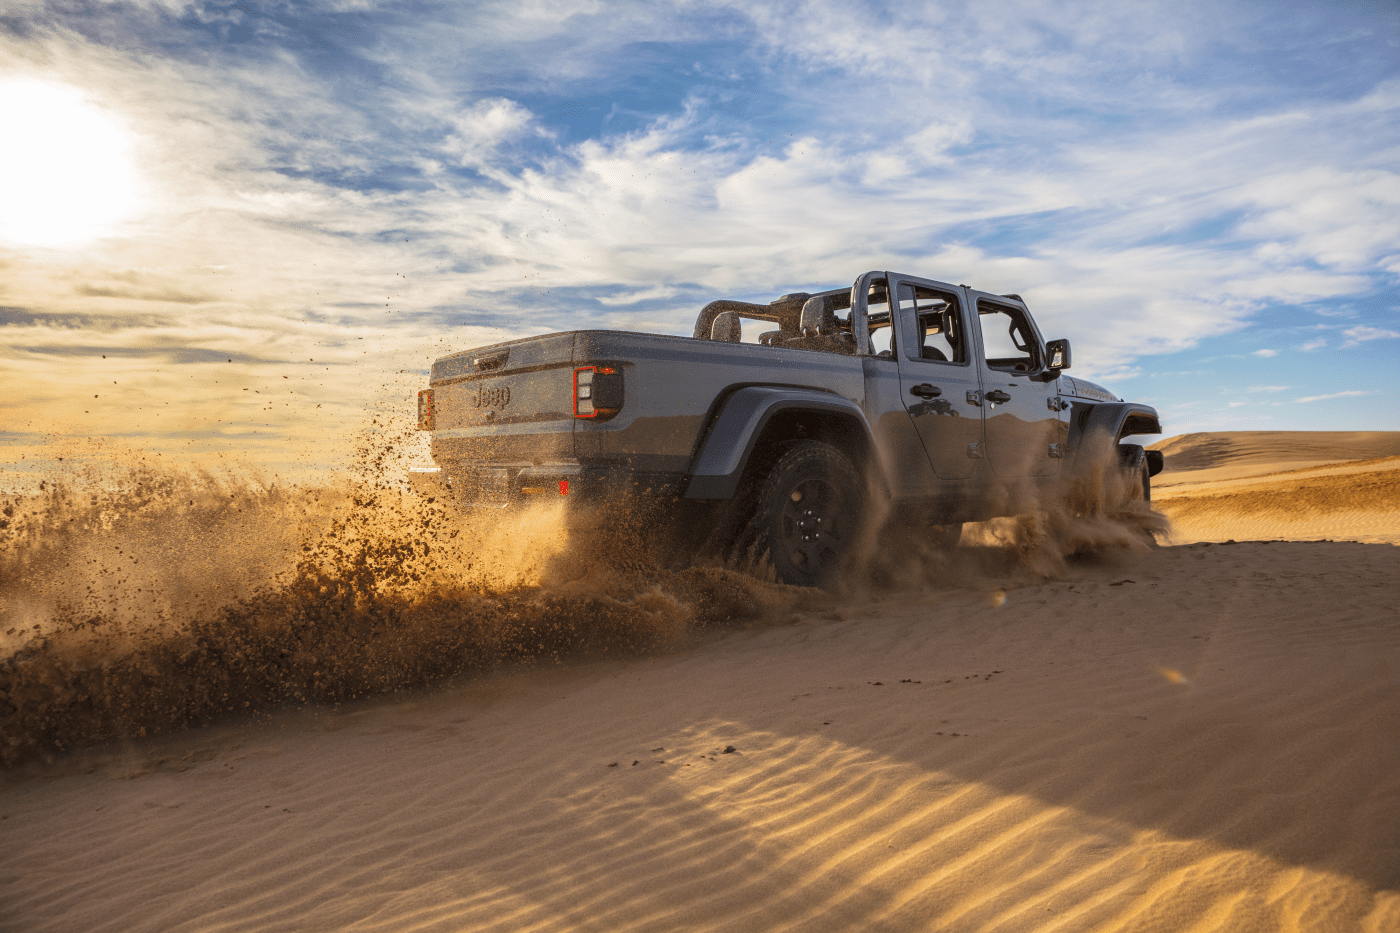 Test Drive The 2021 Jeep Gladiator Today!